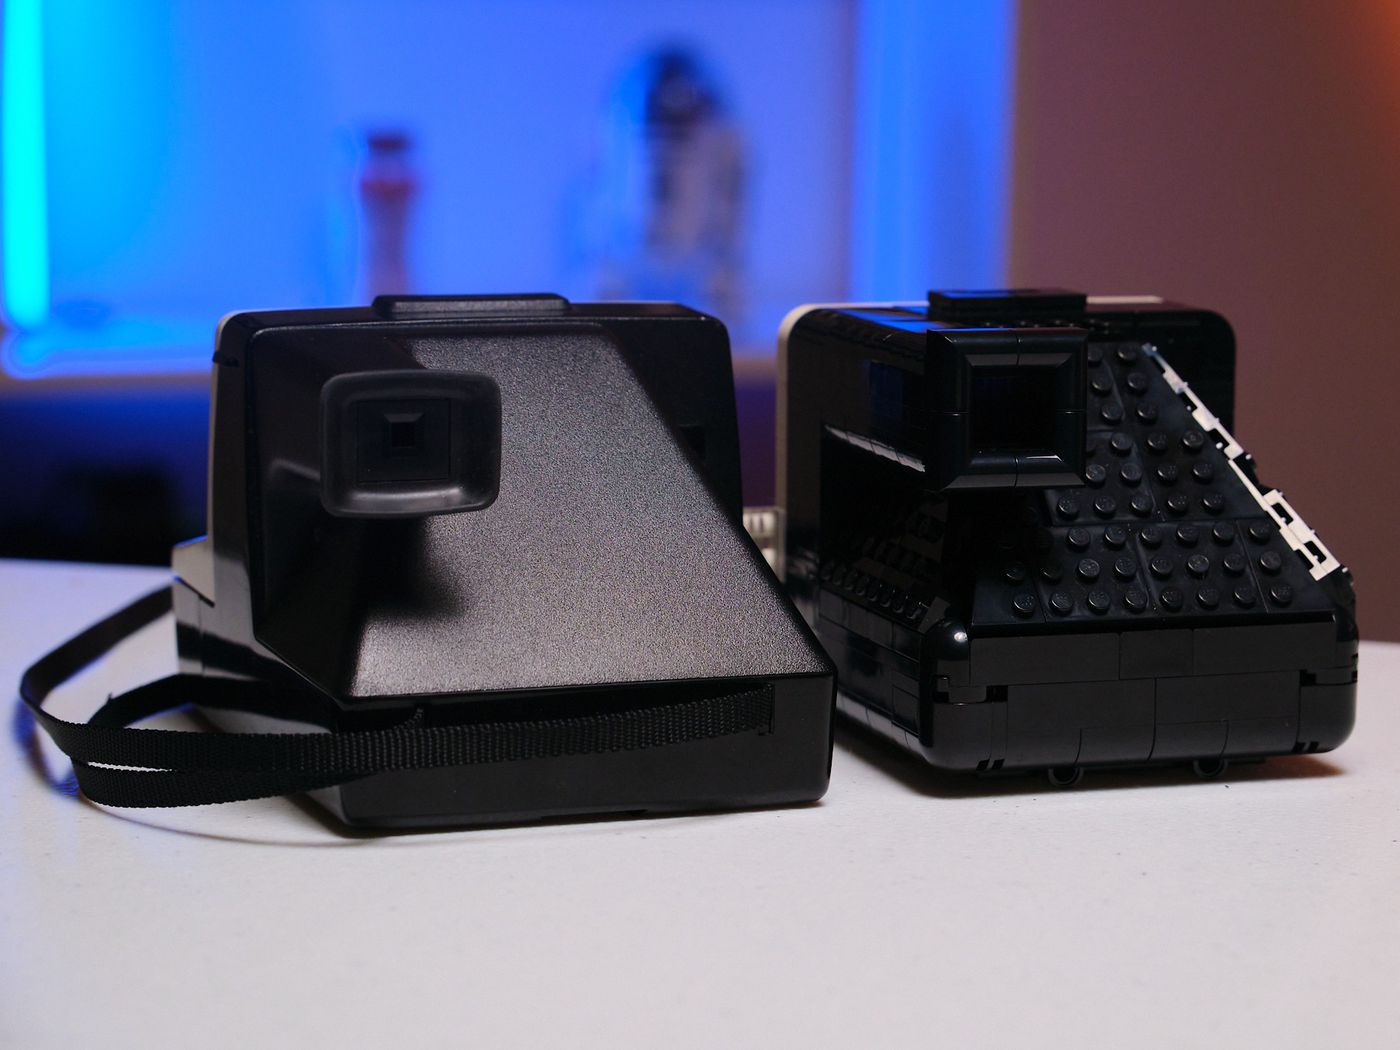 And here’s the real Polaroid’s textured back and the Lego Polaroid’s all-studded back, for comparison.